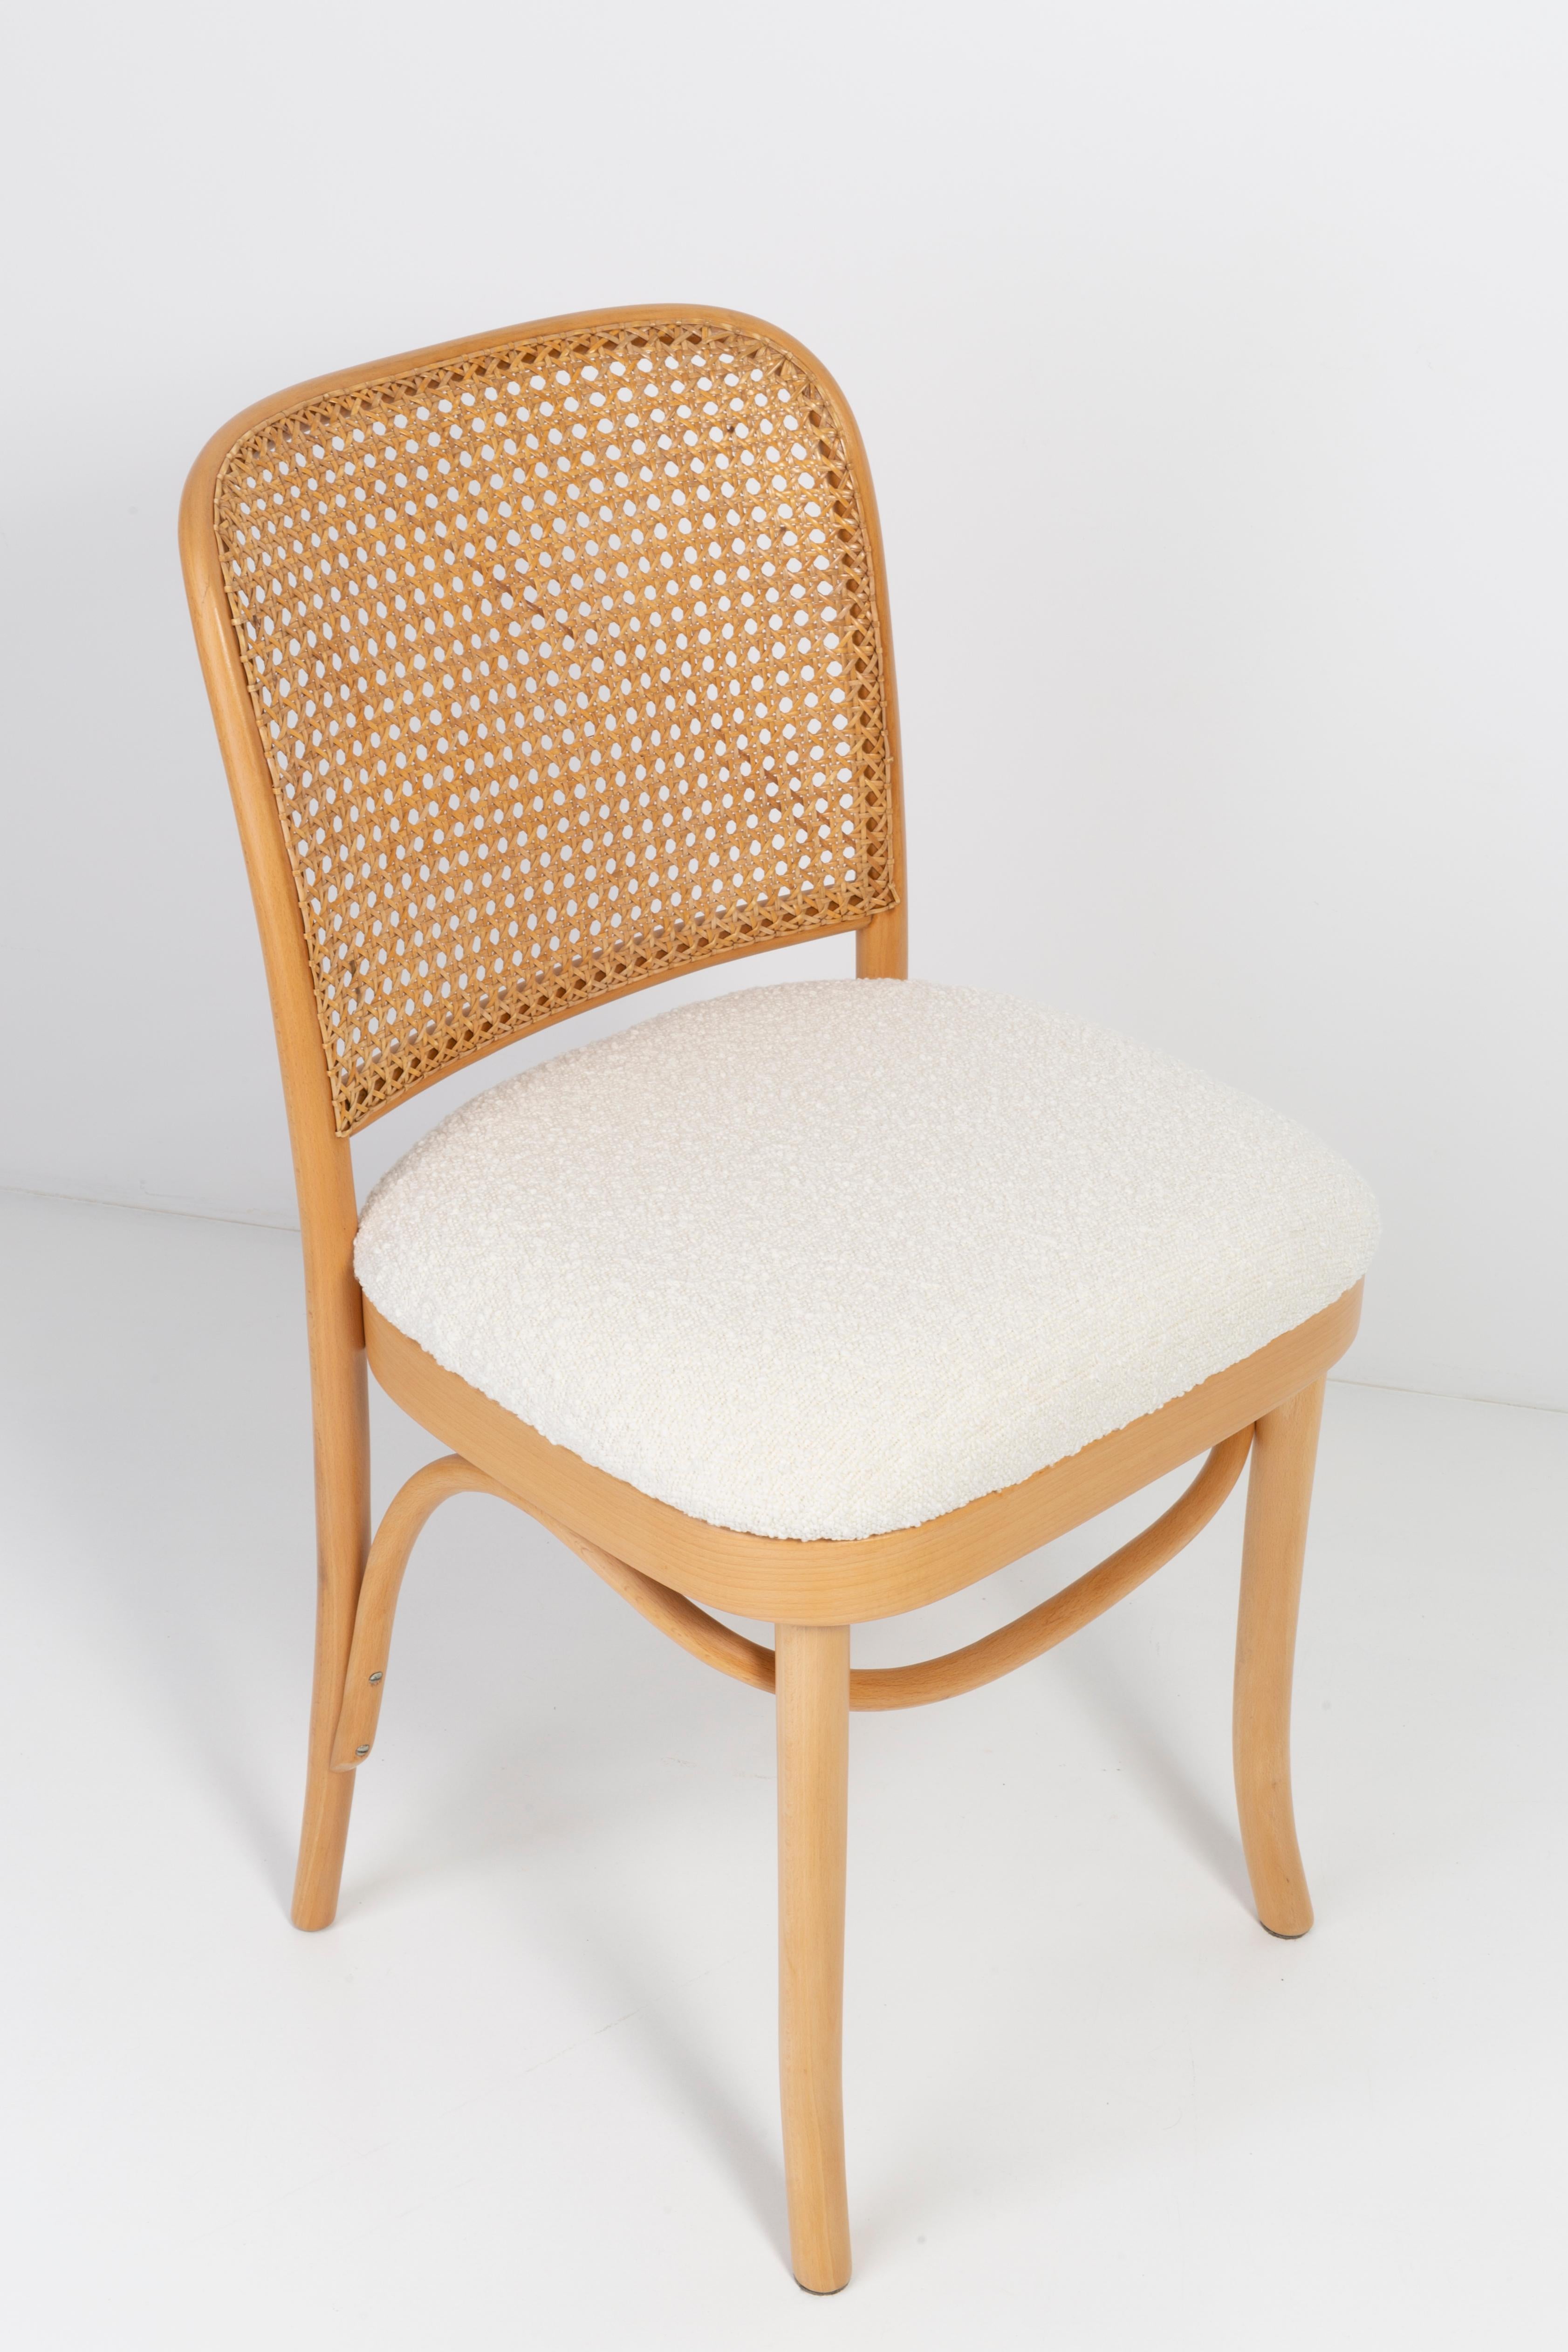 20th Century Set of Six White Boucle Thonet Wood Rattan Chairs, 1960s For Sale